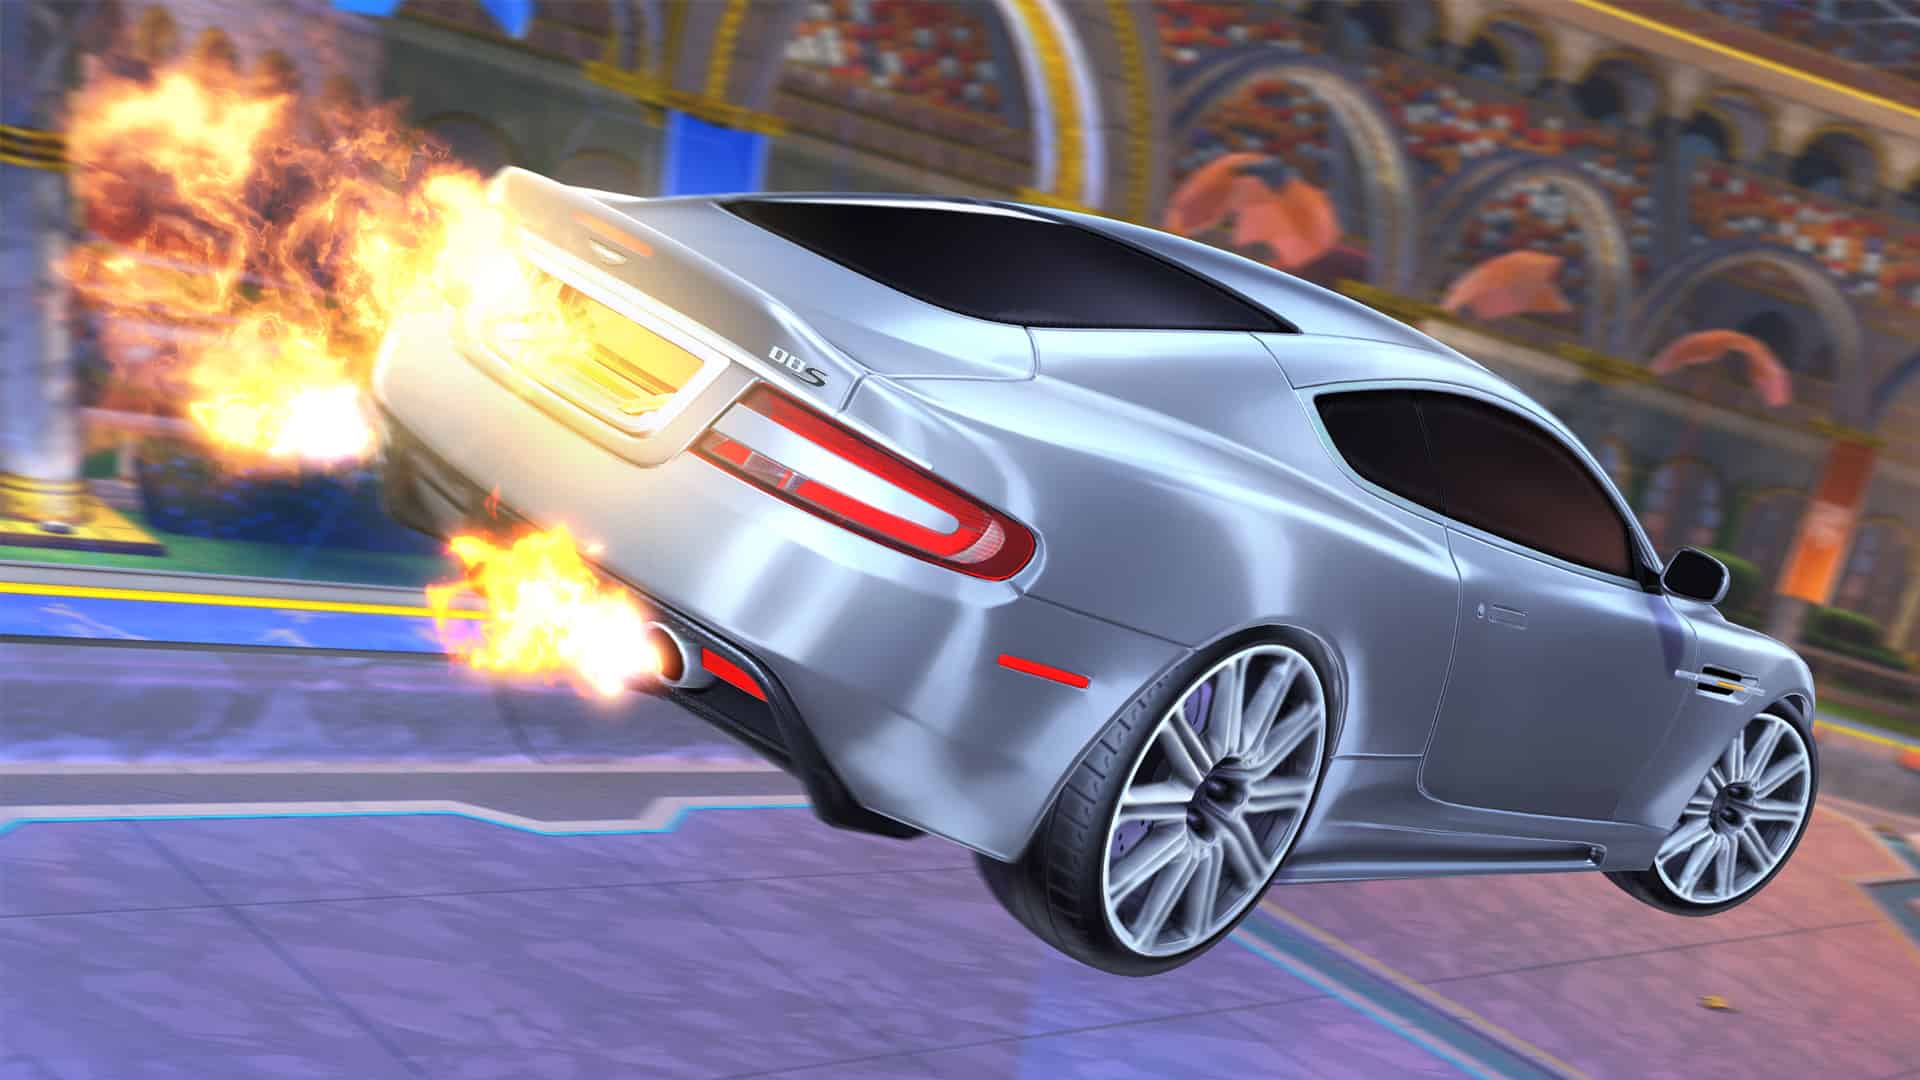 007’s Aston Martin DBS now available in Rocket League